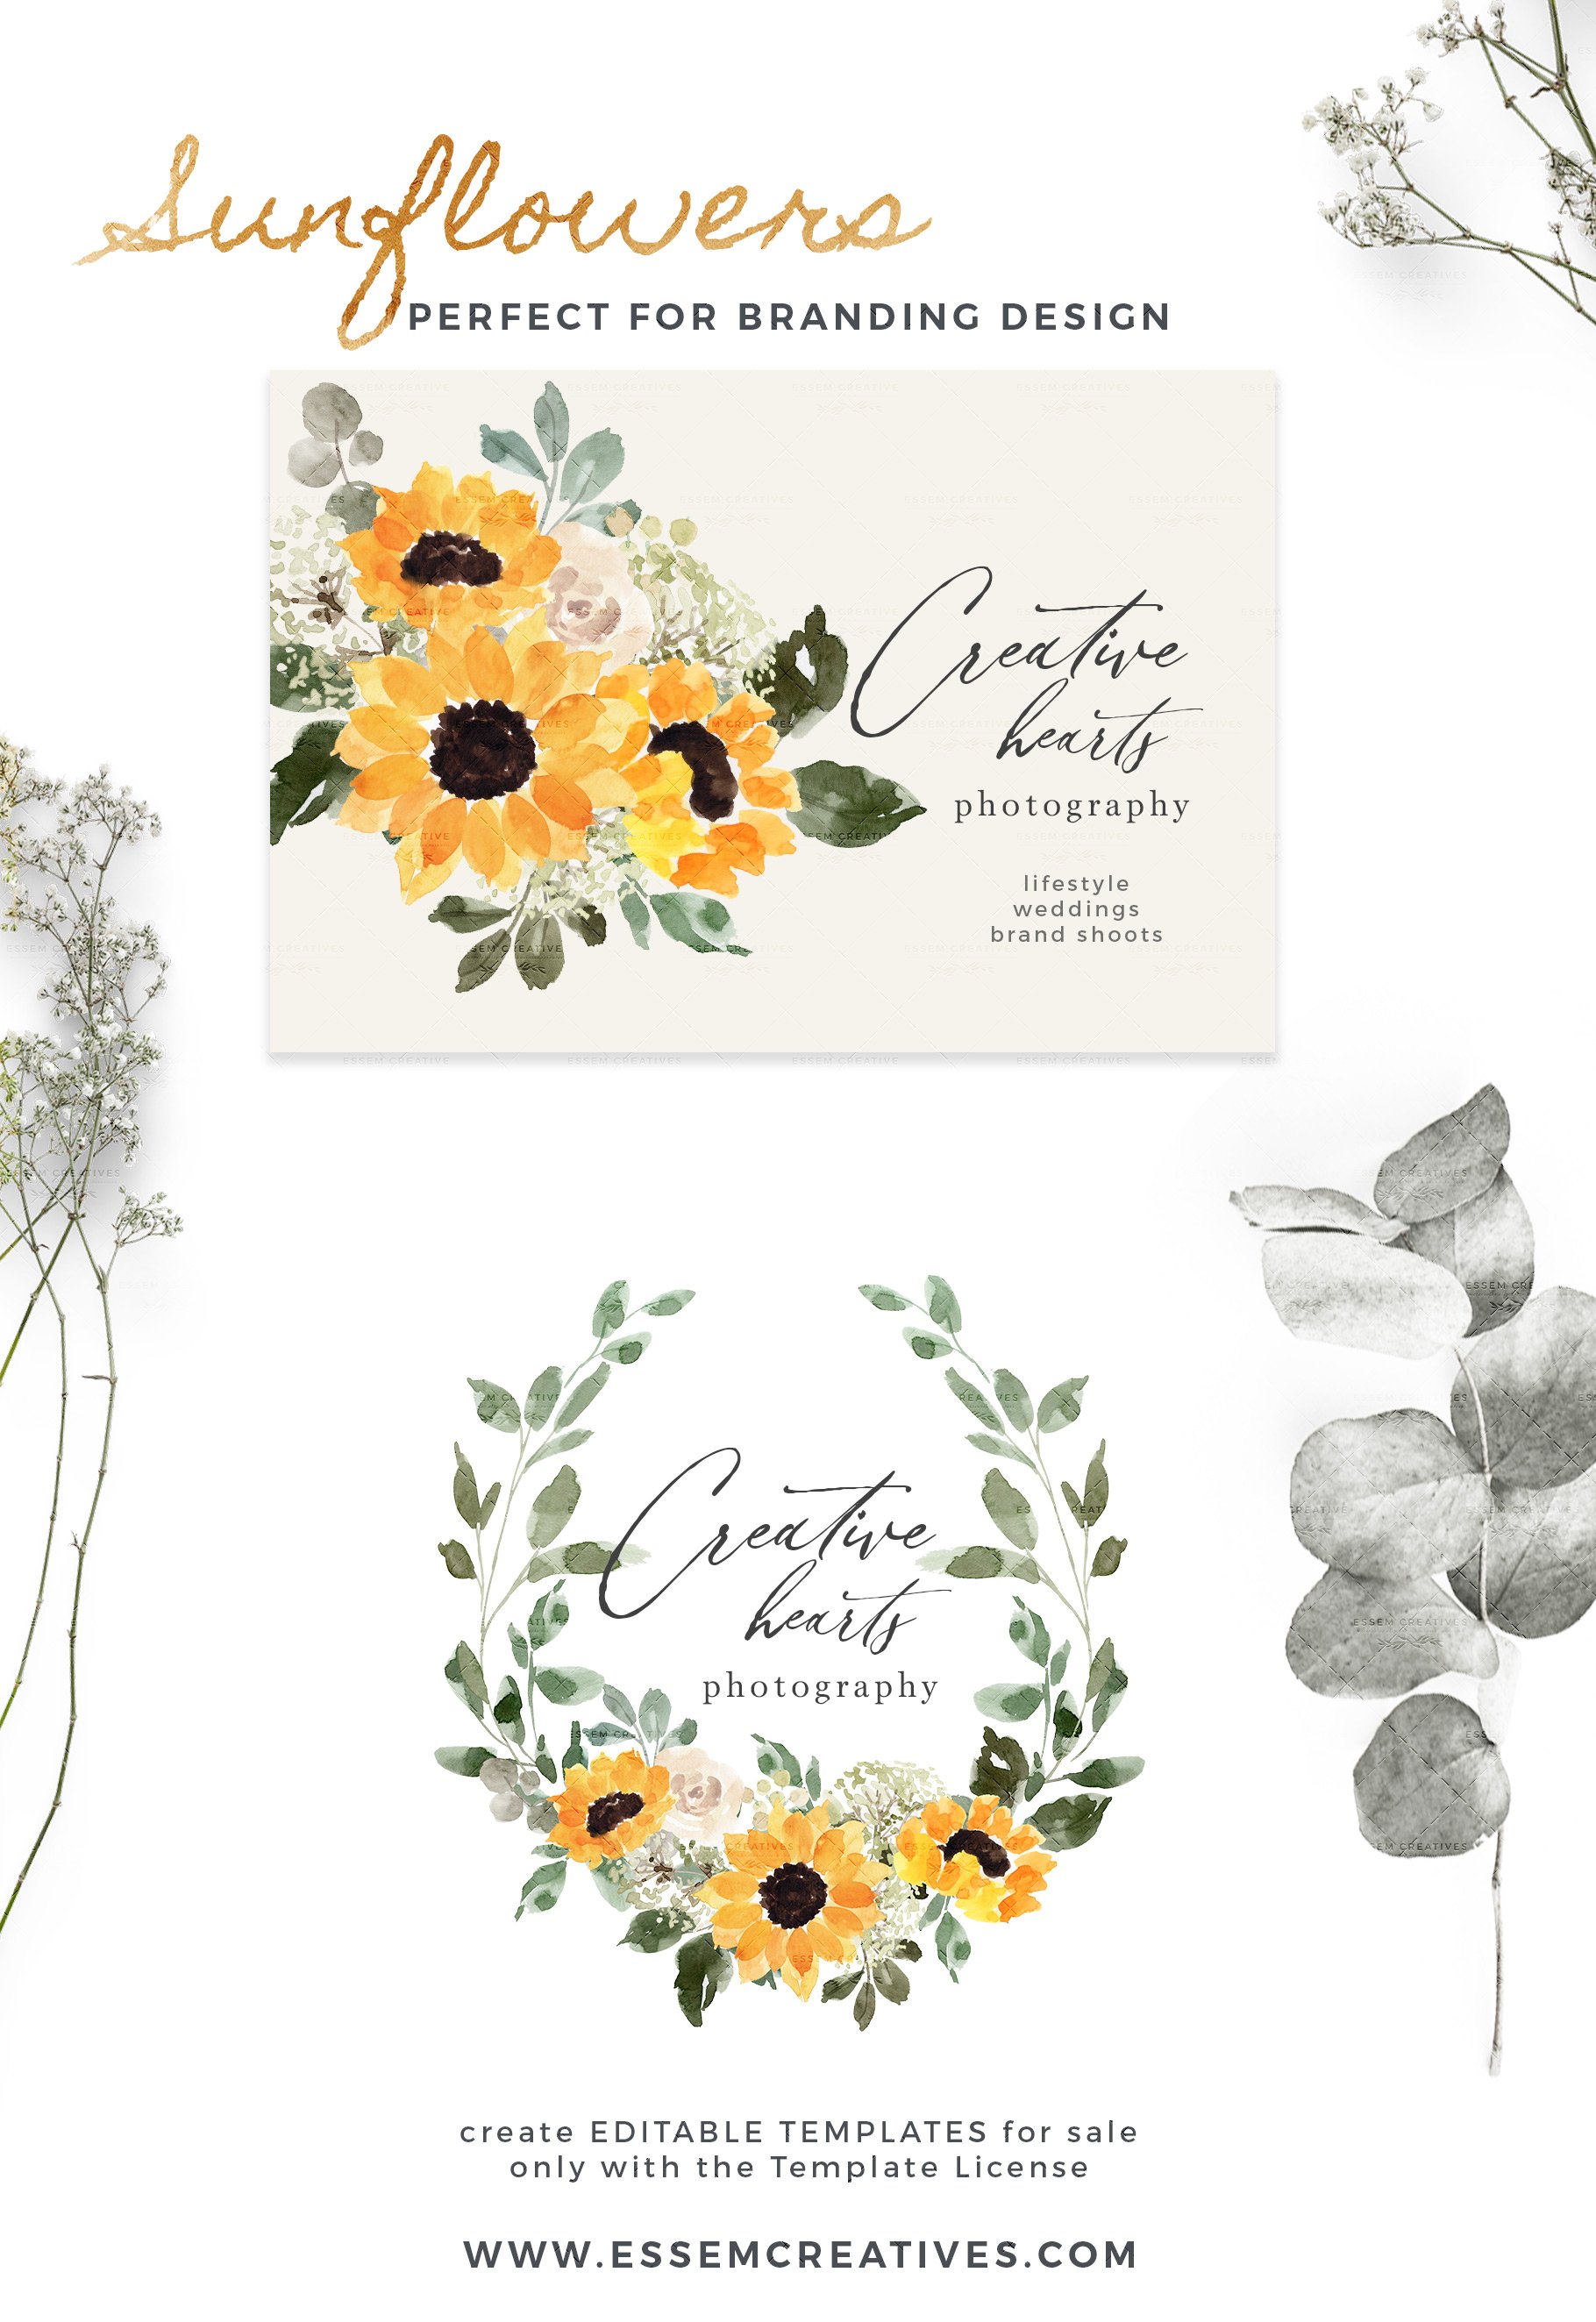 Watercolor Sunflowers Clipart Rustic.